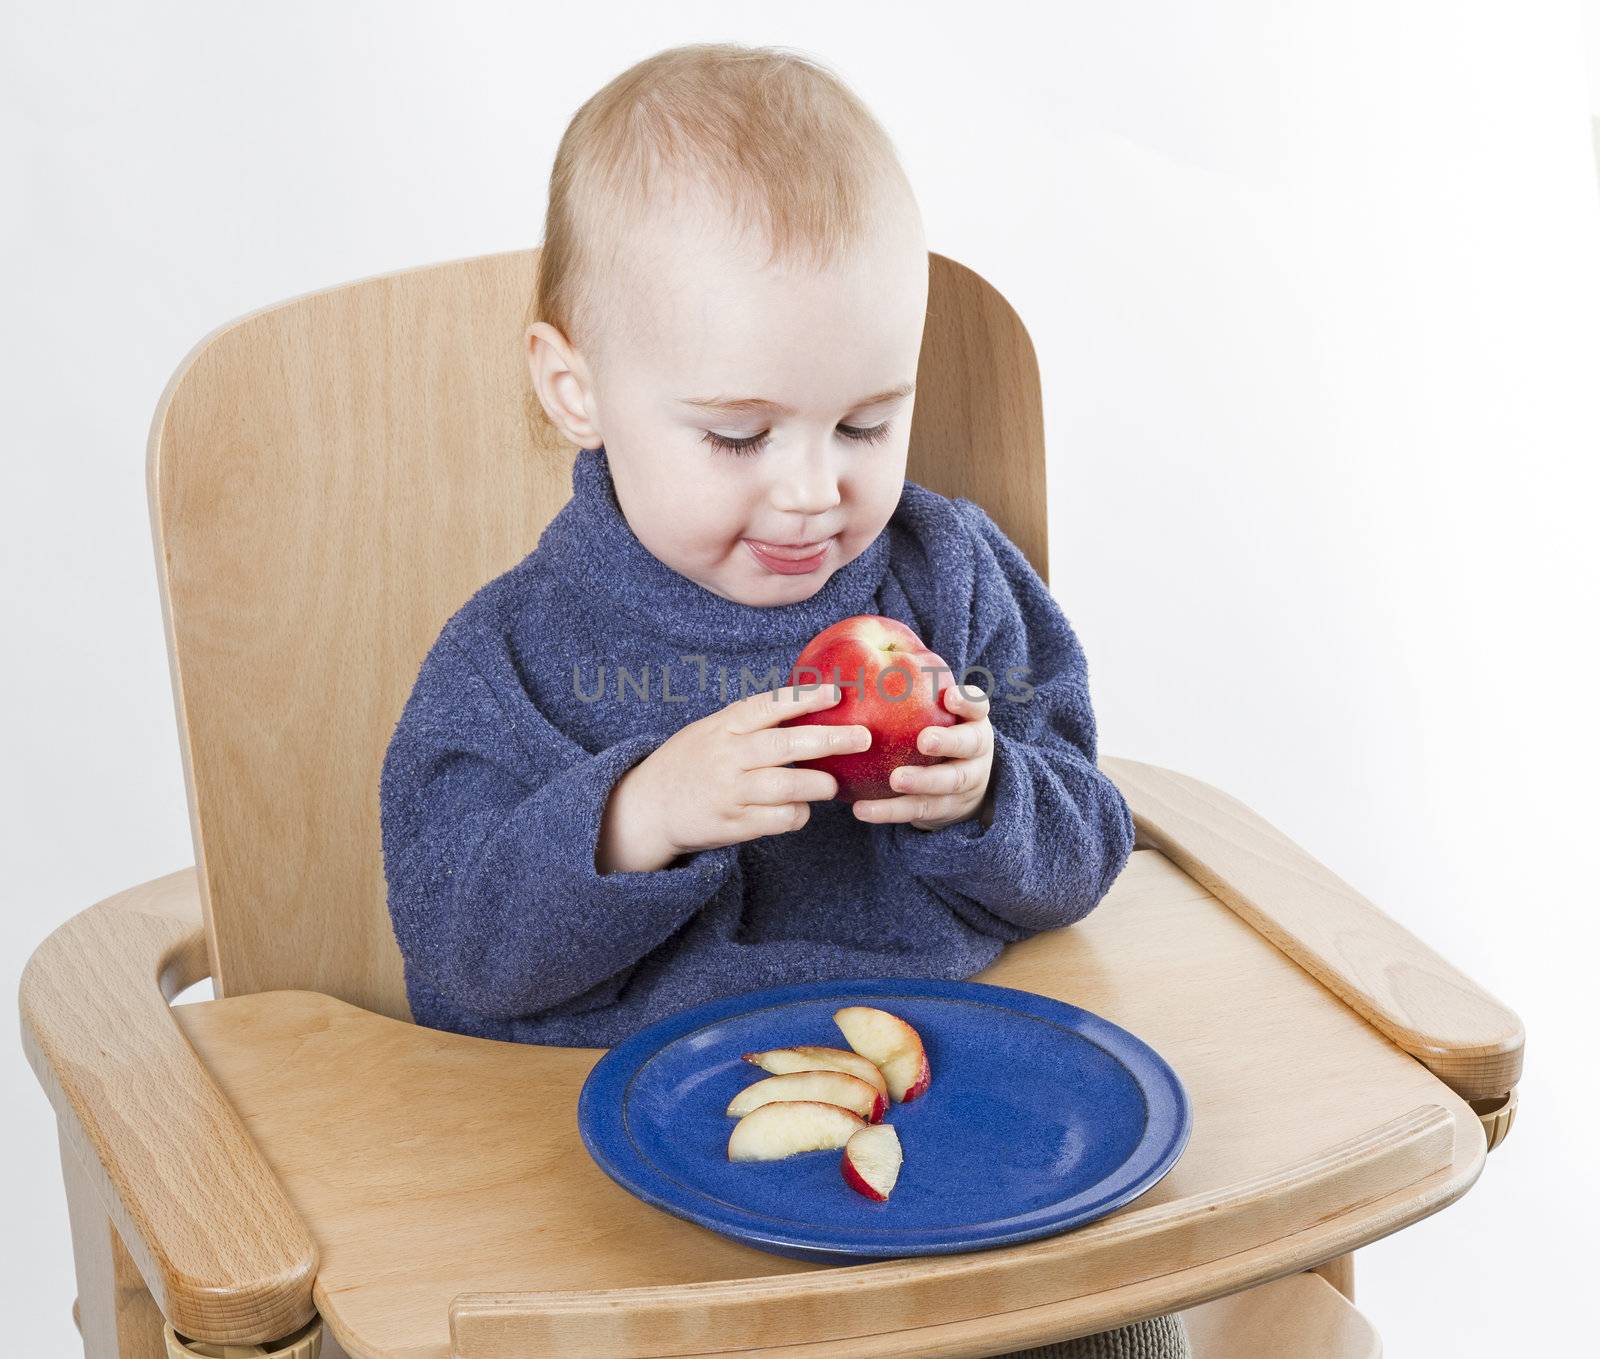 young child eating in high chair isolated in neutral grey background